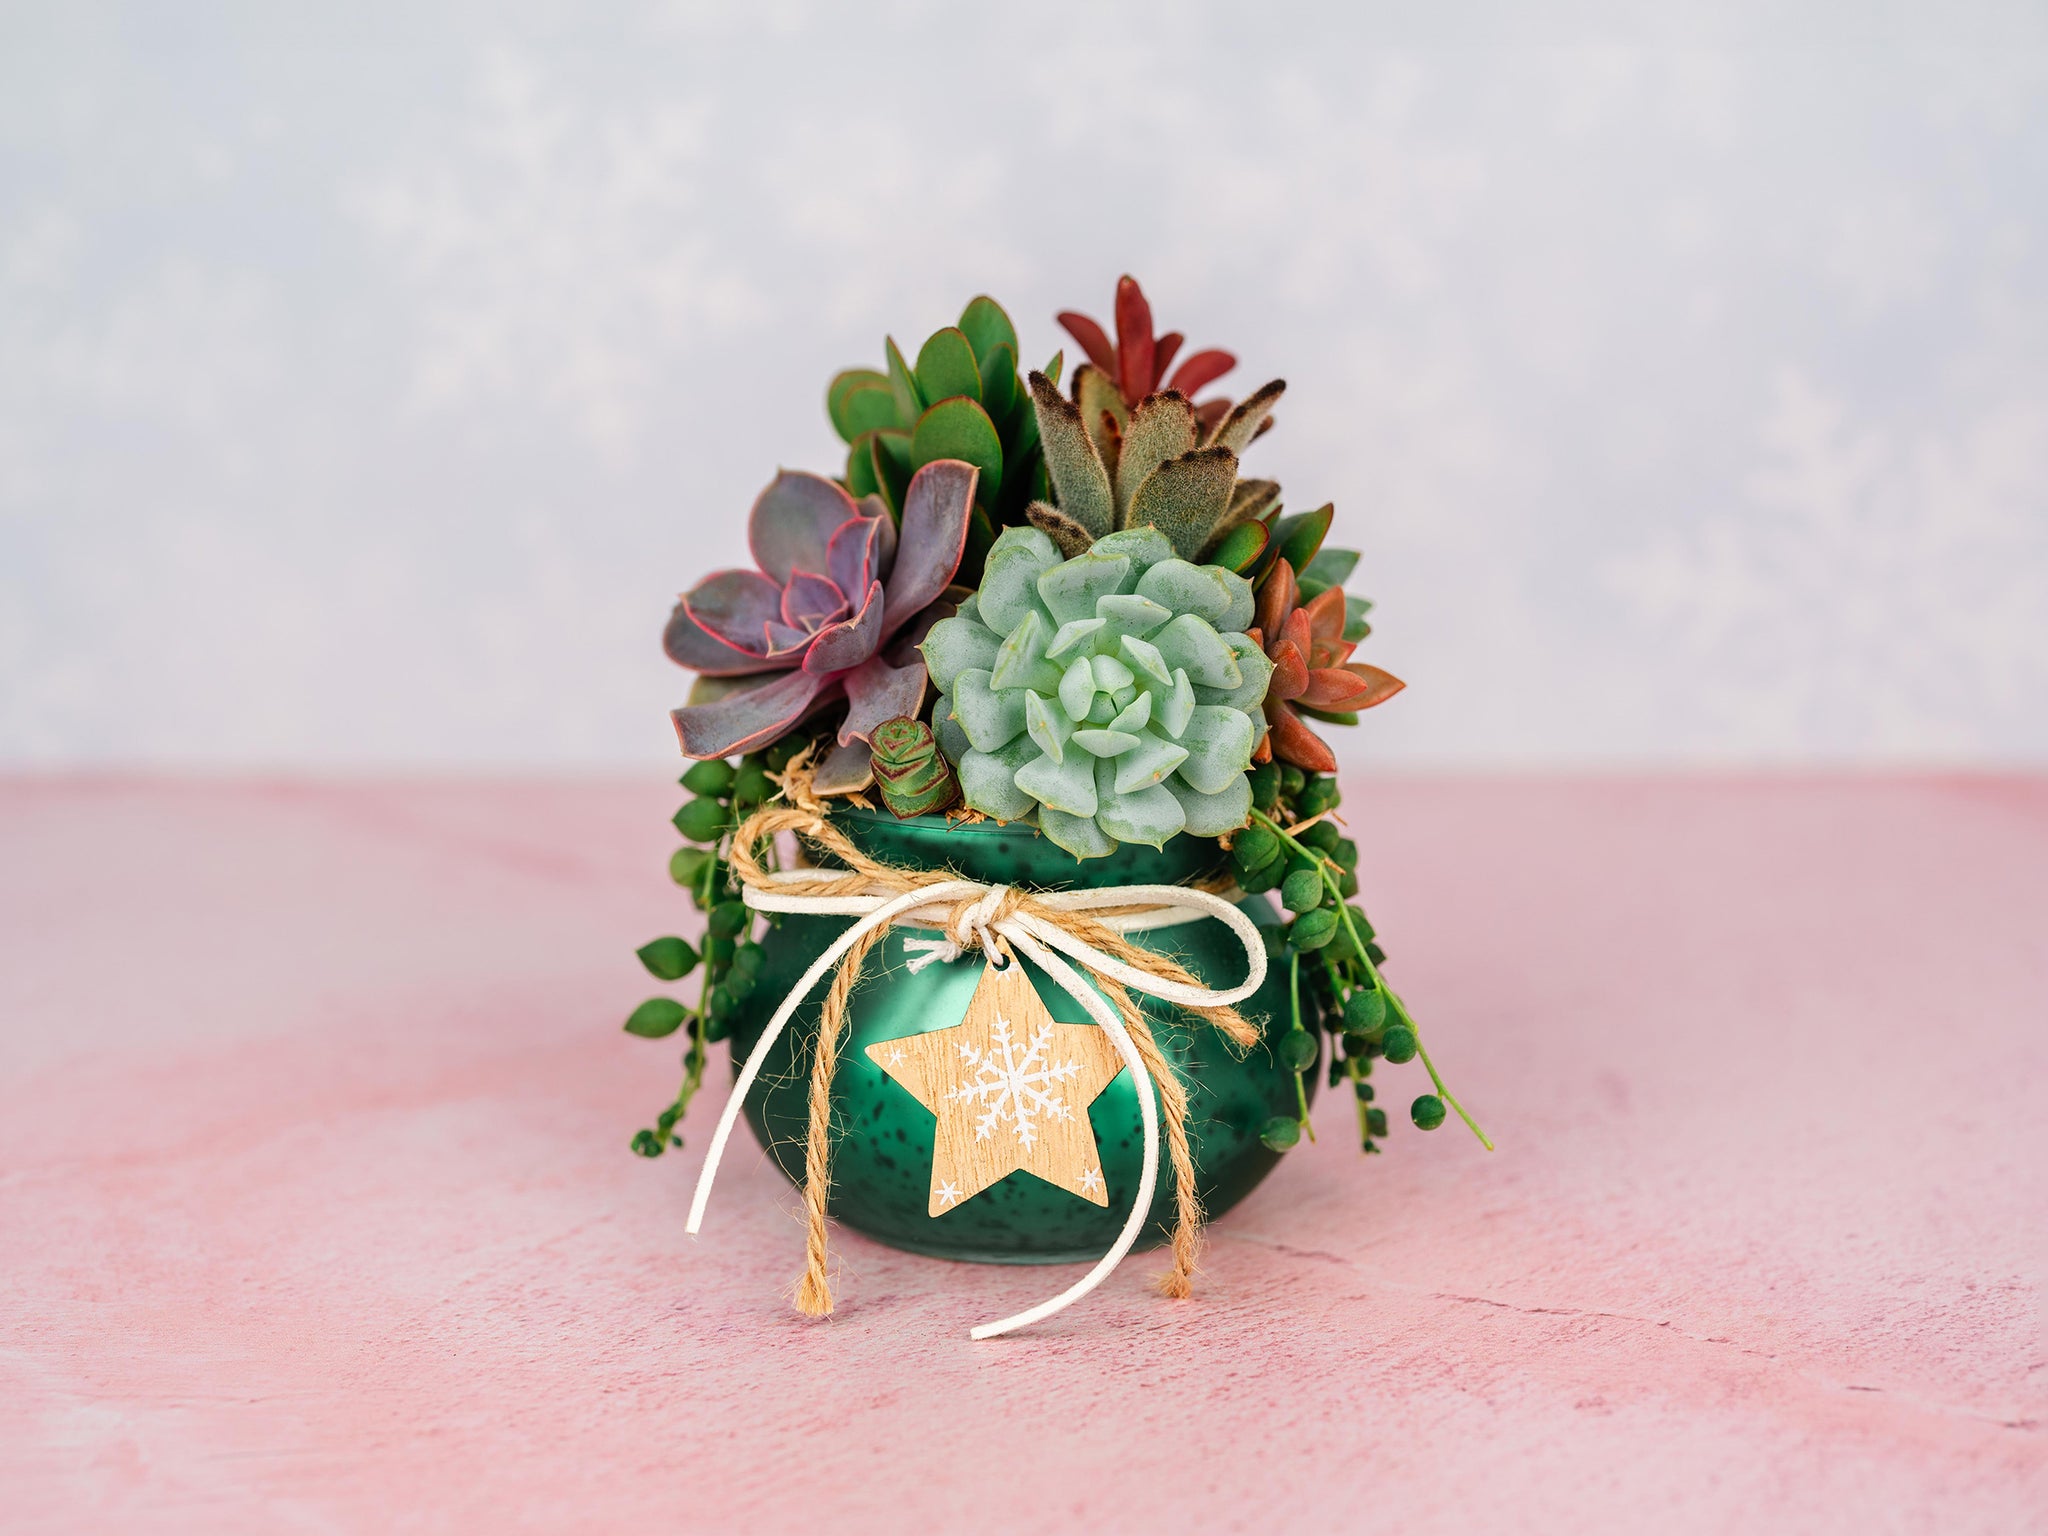 Green Mercury Glass Christmas Succulent Gift Arrangement with Rustic Wood Star